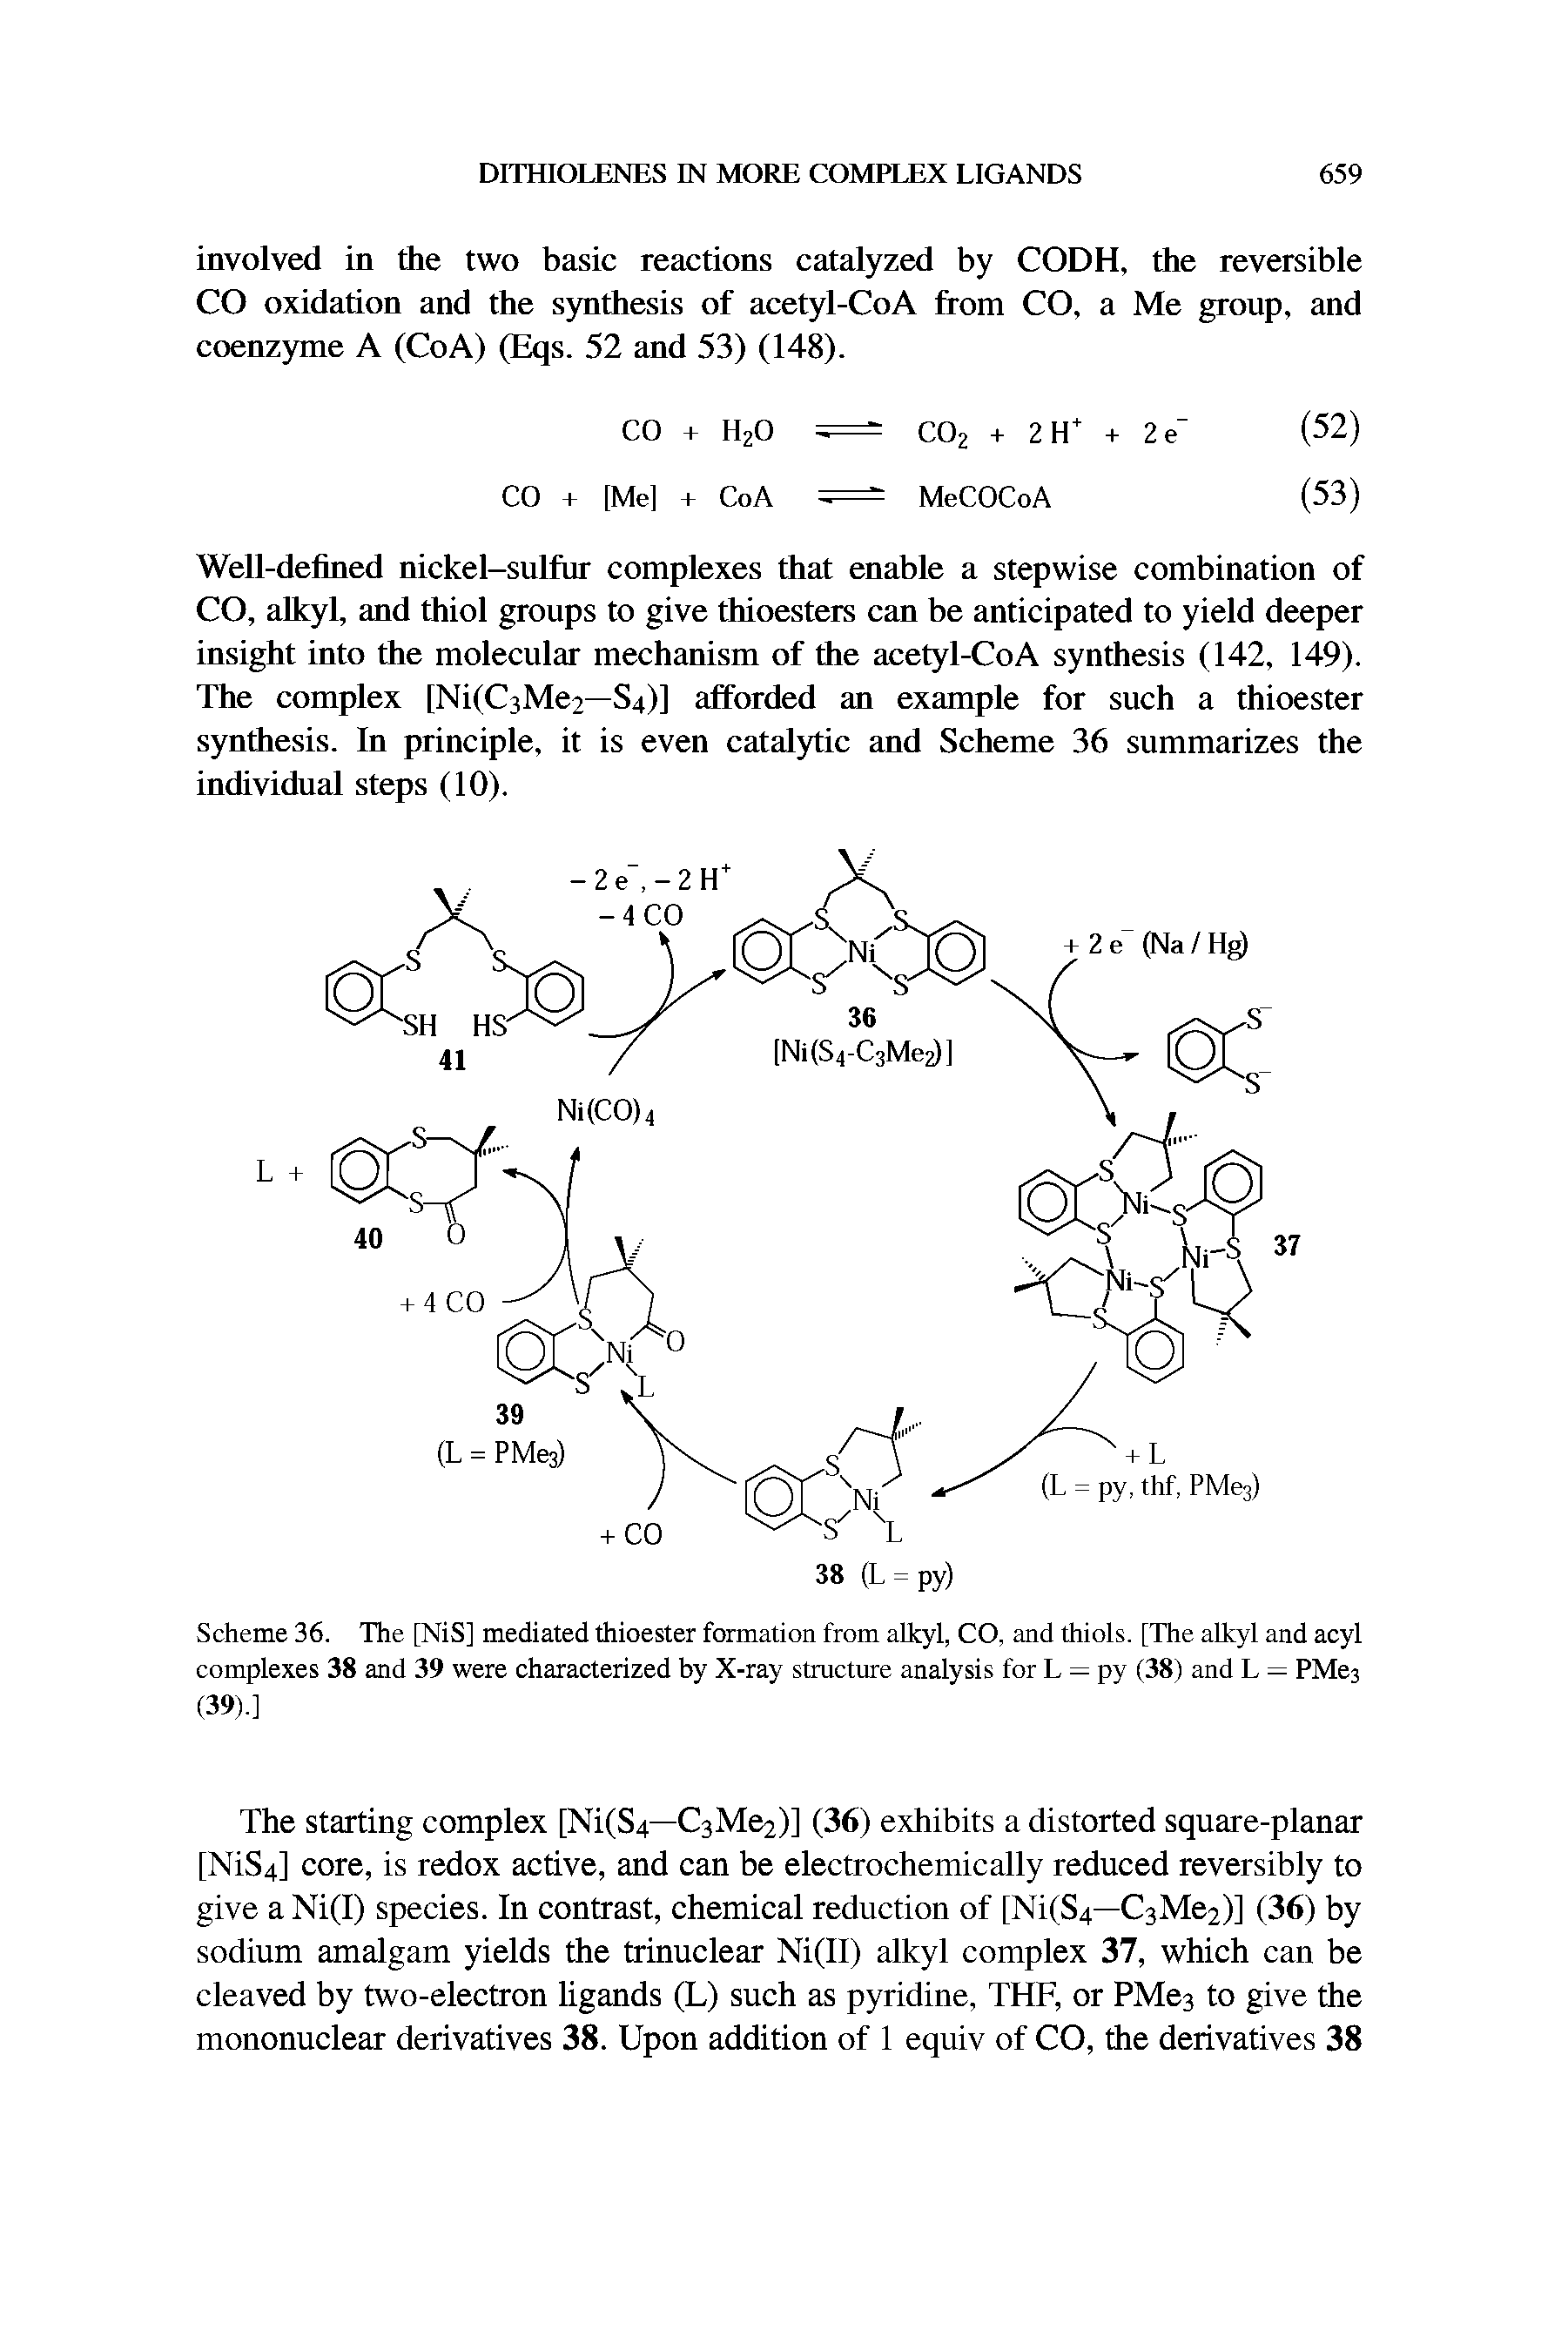 Scheme 36. The [NiS] mediated thioester formation from alkyl, CO, and thiols. [The alkyl and acyl complexes 38 and 39 were characterized by X-ray structure analysis for L = py (38) and L = PMe3 (39).]...